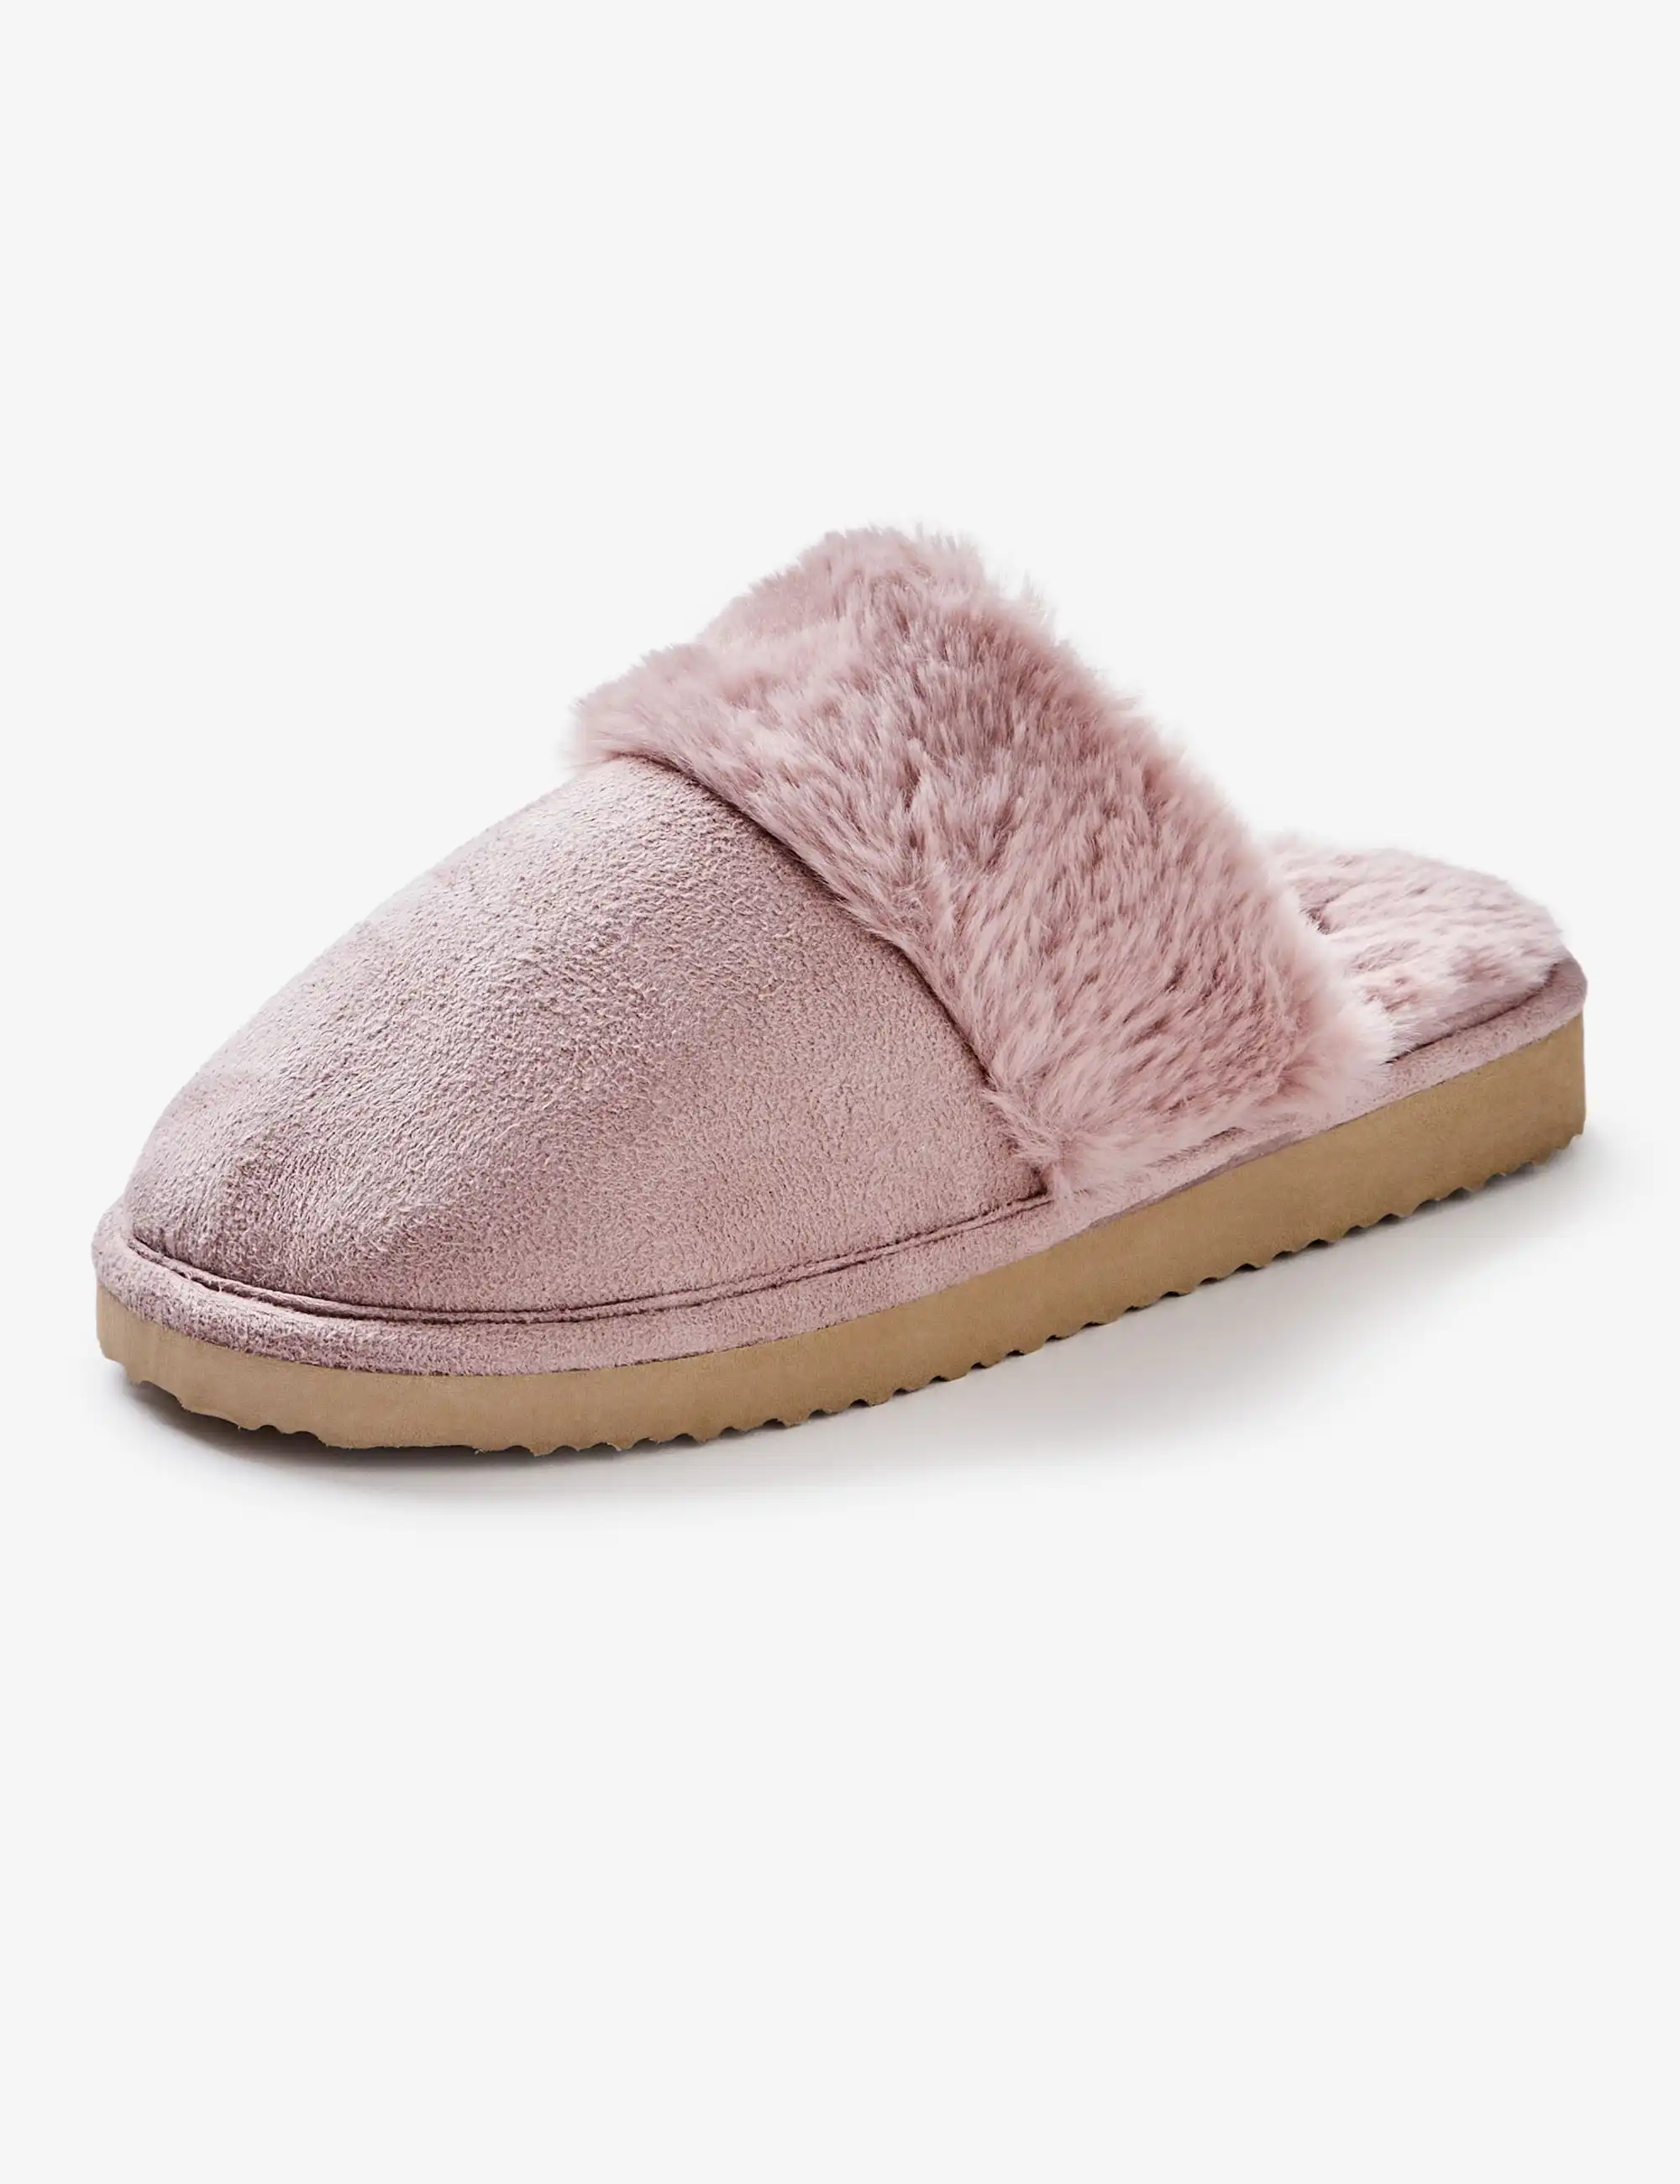 Rivers Plush Lined Slippers Mule